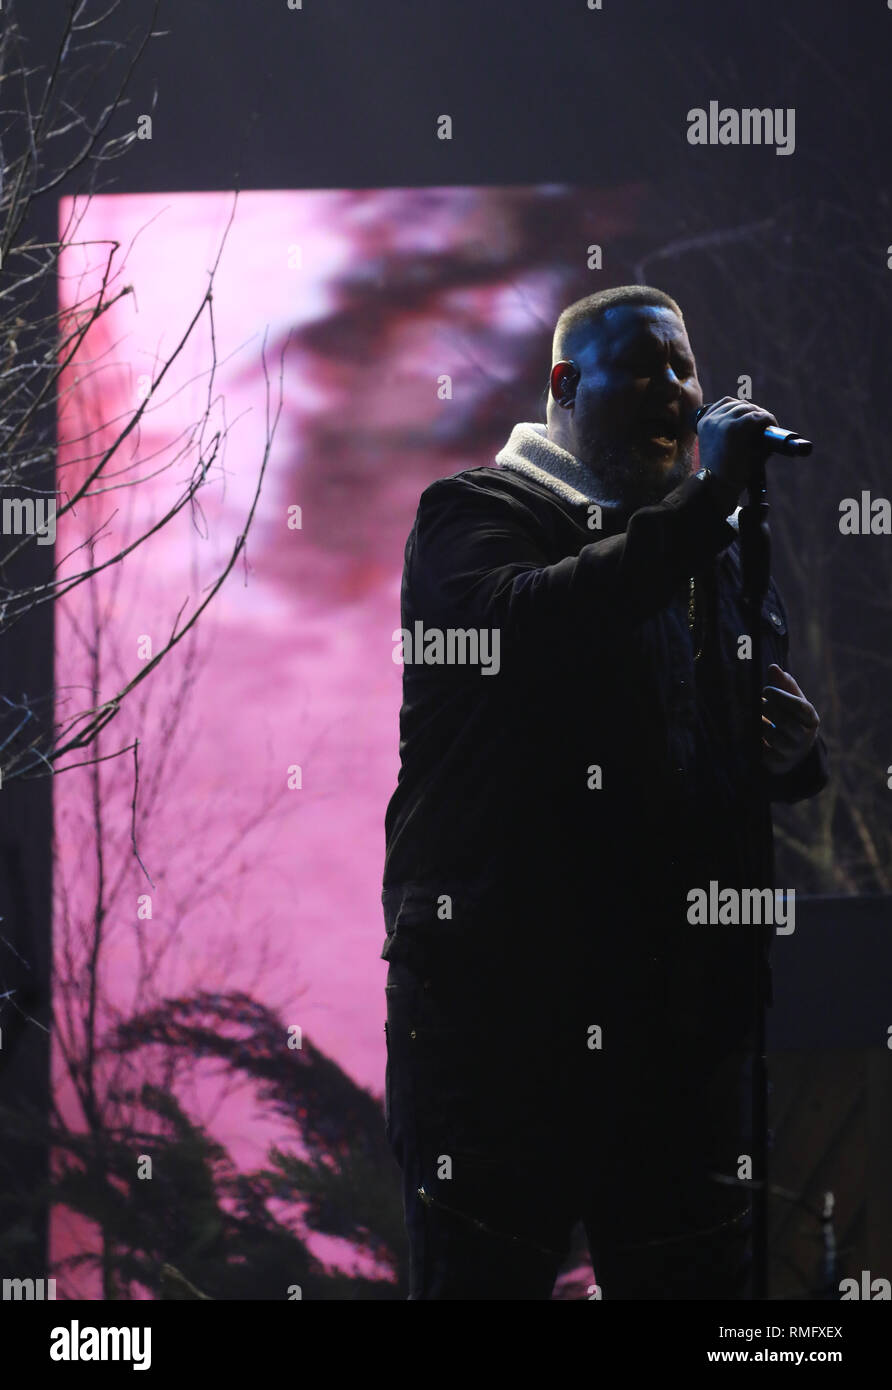 Rory Charles Graham, better known as Rag'n'Bone Man, performing with Calvin Harris (not pictured) during the filming for the Graham Norton Show at BBC Studioworks 6 Television Centre, Wood Lane, London, to be aired on BBC One on Friday evening. PRESS ASSOCIATION. Picture date: Thursday February 14, 2019. Photo credit should read: PA Images on behalf of So TV Stock Photo